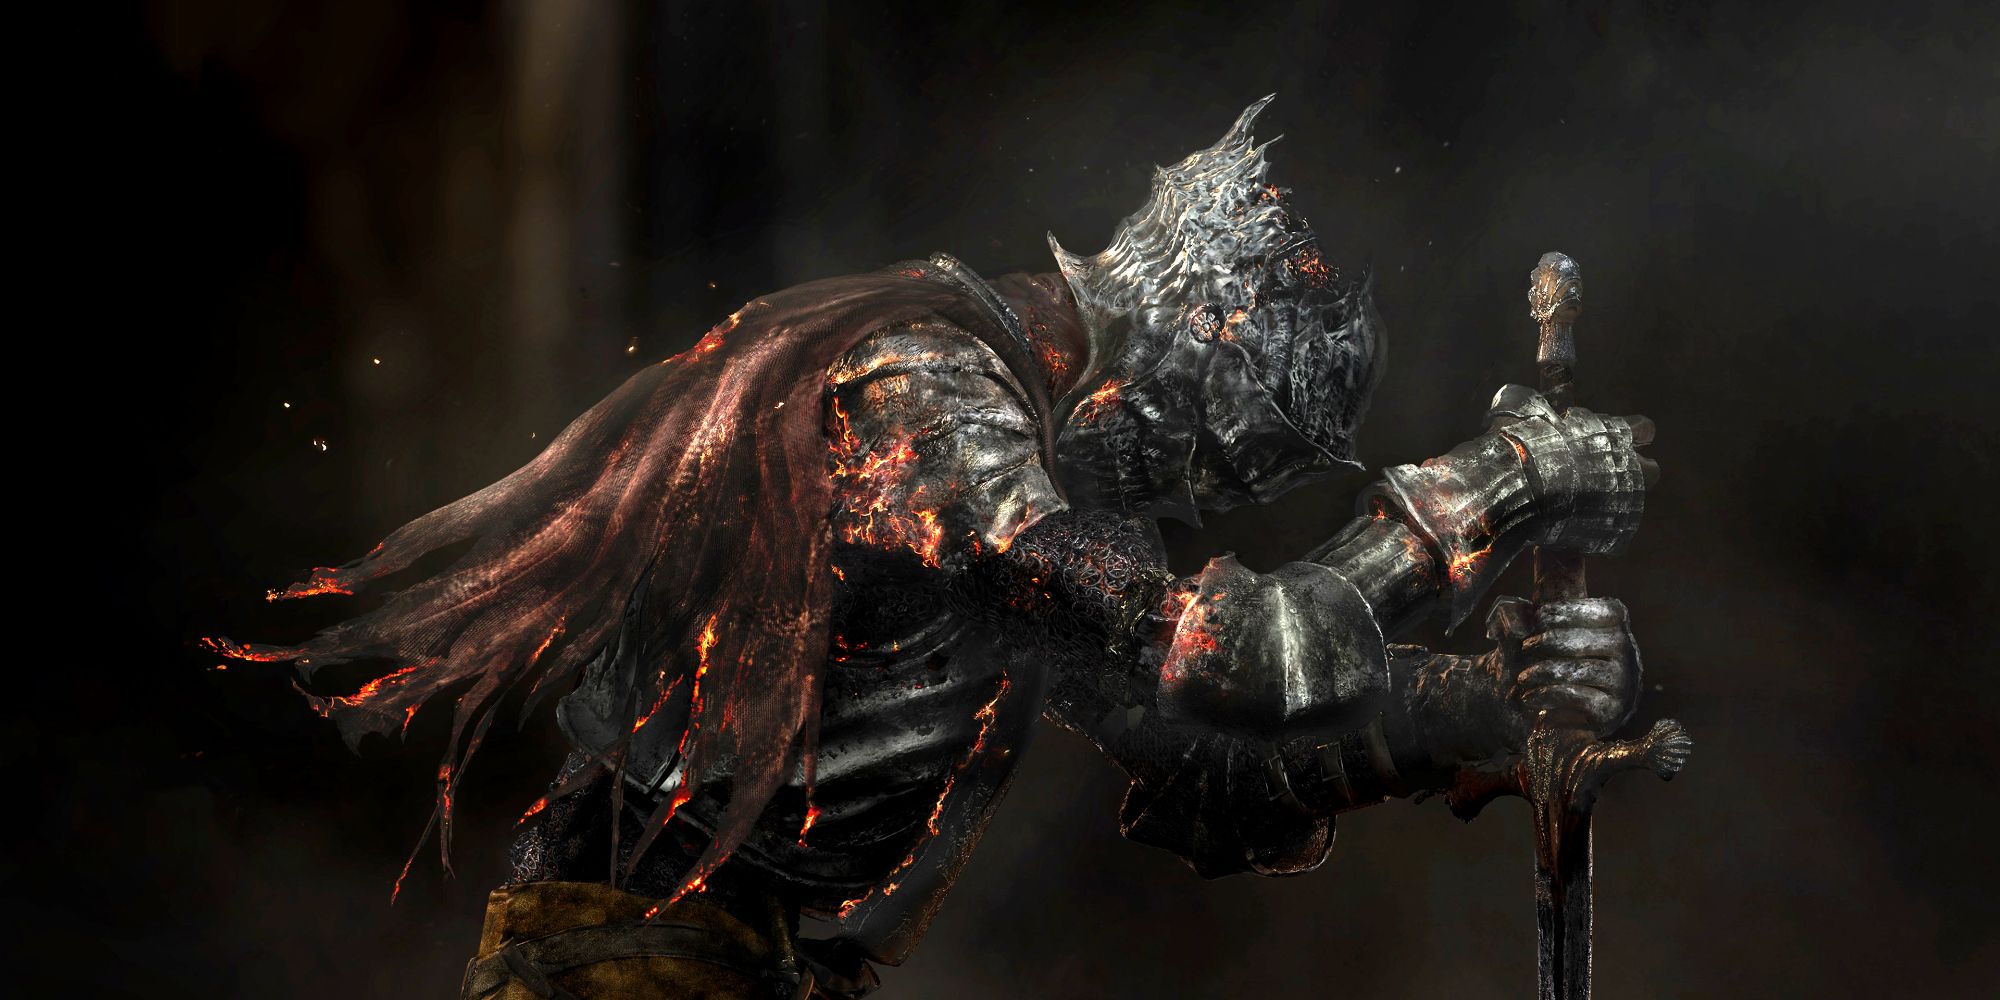 The Best Way To Play Dark Souls When You're Bad